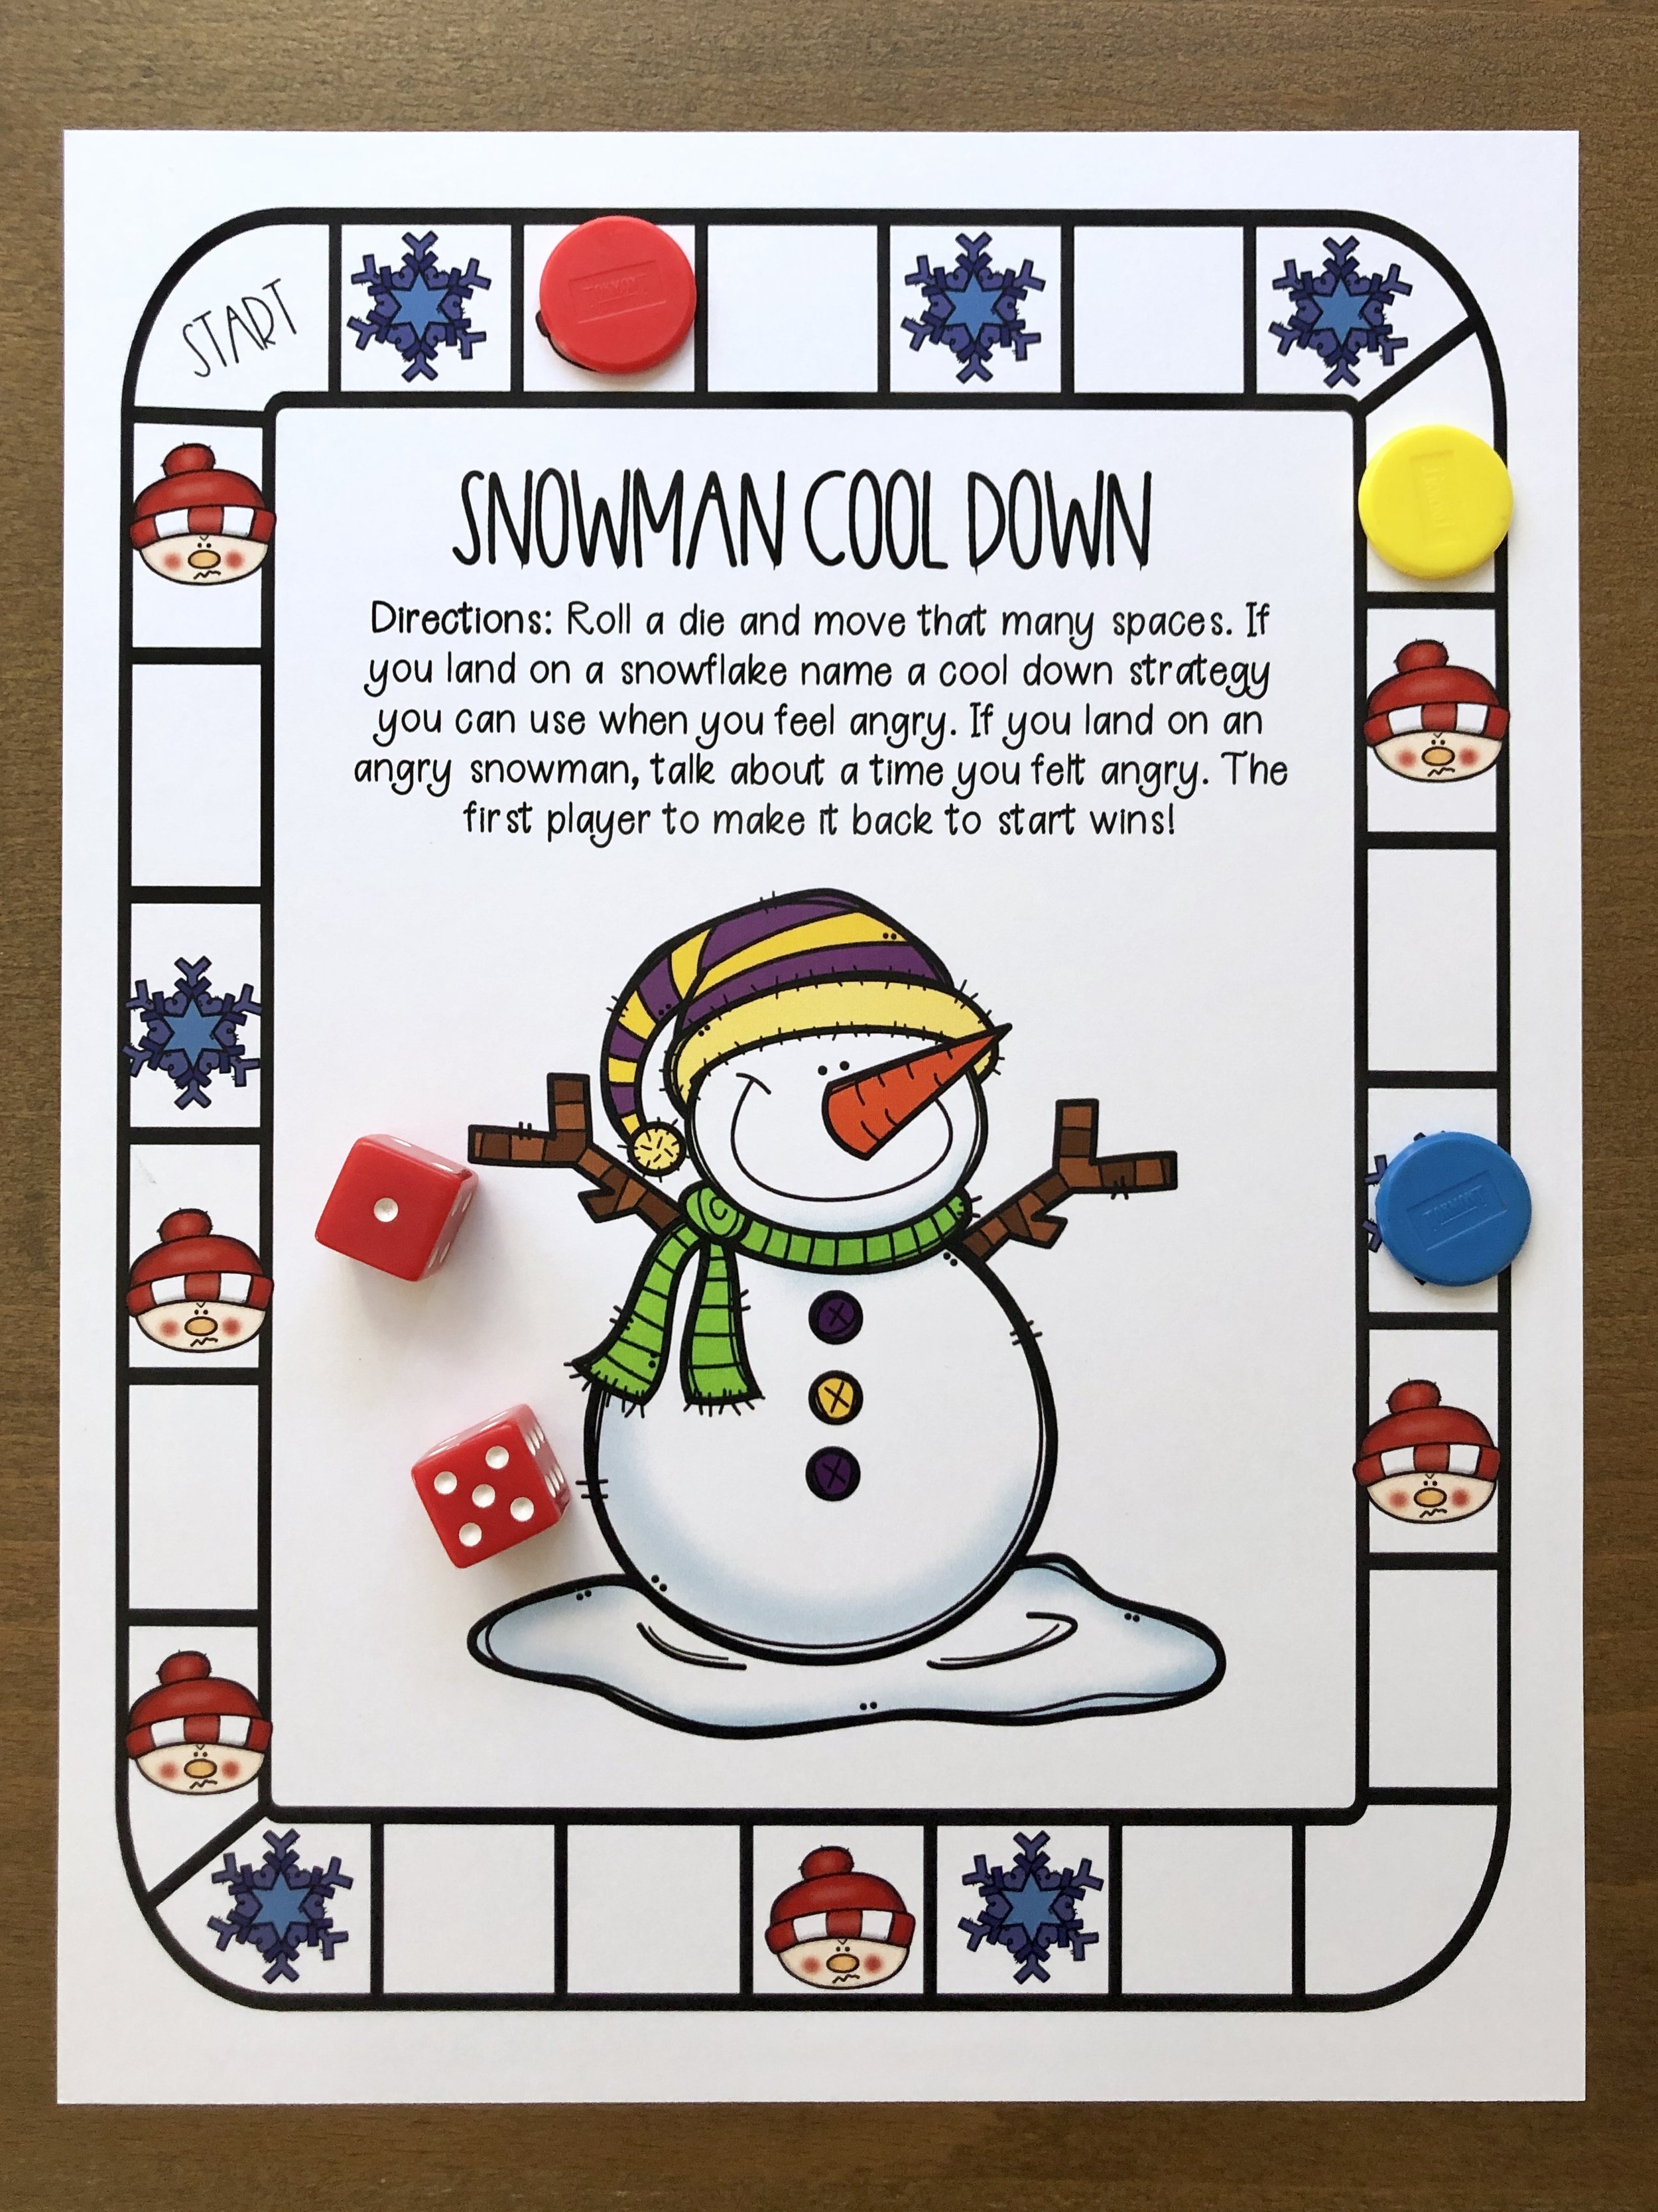 Snowman Counseling Board Game